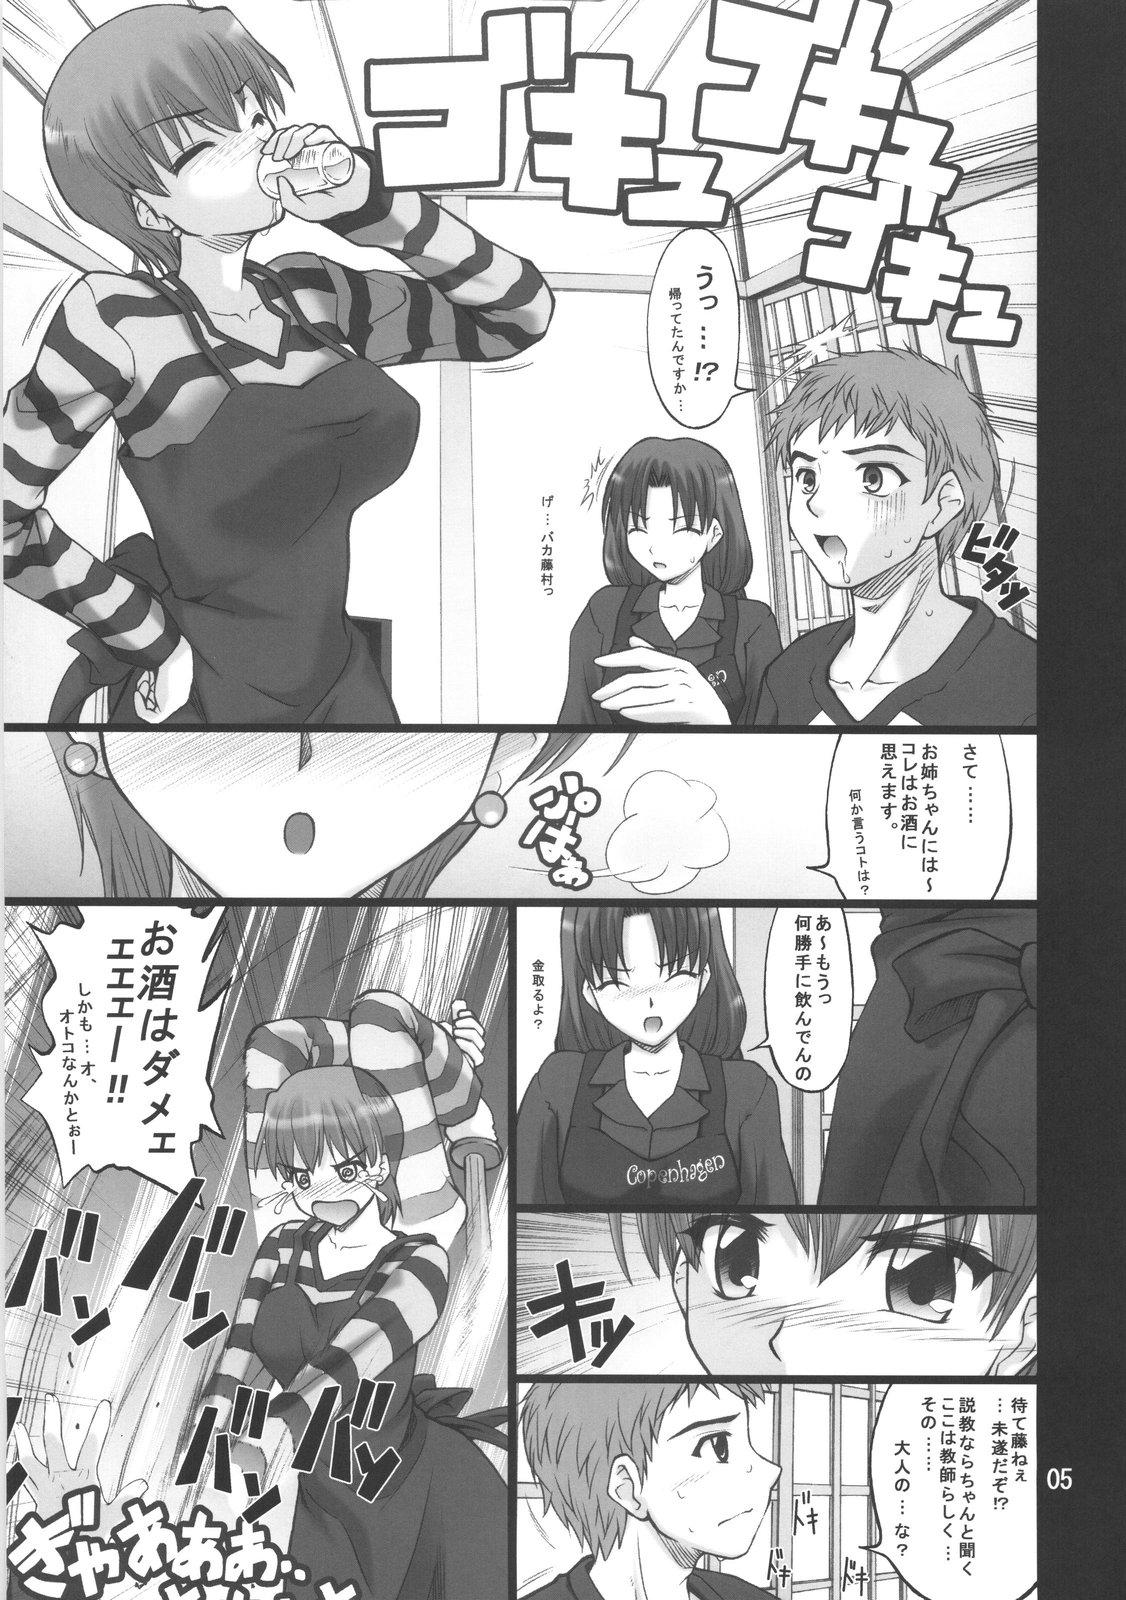 Missionary Position Porn Nekotora - Fate hollow ataraxia Candid - Page 4